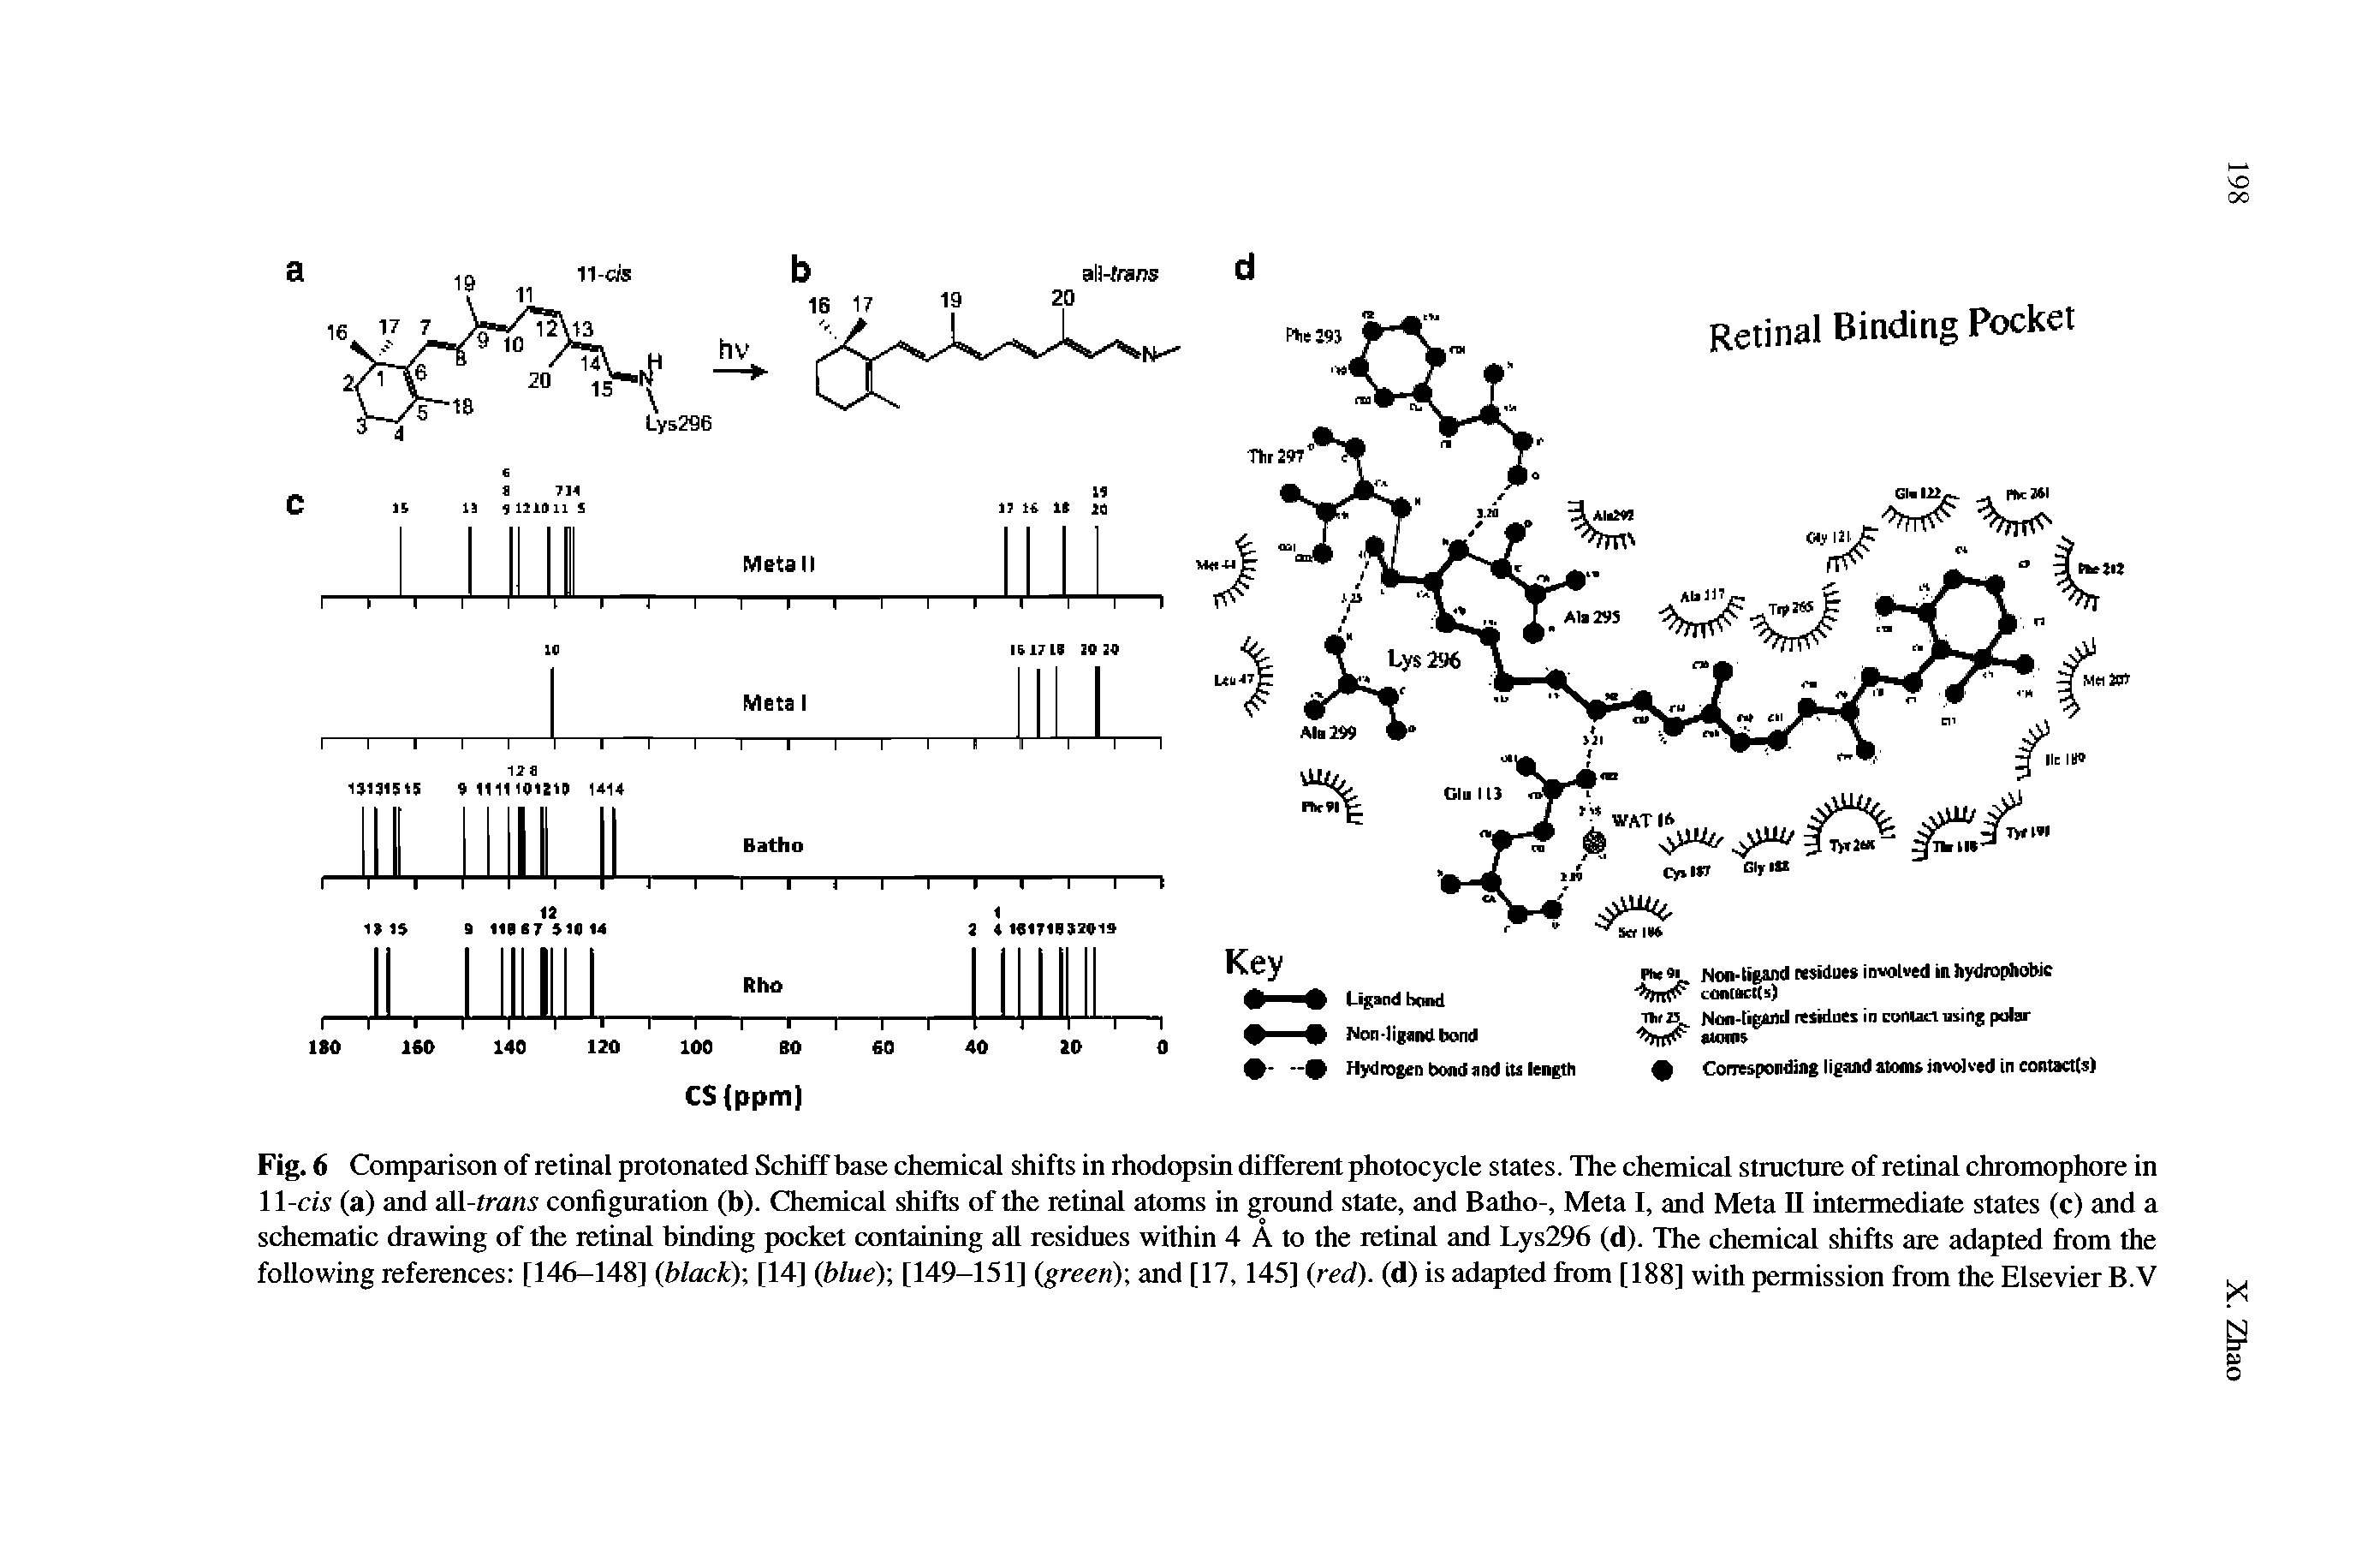 Fig. 6 Comparison of retinal protonated Schiff base chemical shifts in rhodopsin different photocycle states. The chemical structure of retinal chromophore in 11-cw (a) and all-trans configuration (b). Chemical shifts of the retinal atoms in ground state, and Batho-, Meta I, and Meta II intermediate states (c) and a schematic drawing of the retinal binding pocket containing all residues within 4 A to the retinal and Lys296 (d). The chemical shifts are adapted from the following references [146-148] (black) [14] (blue) [149-151] (green) and [17, 145] (red), (d) is adapted from [188] with permission from the Elsevier B.V...